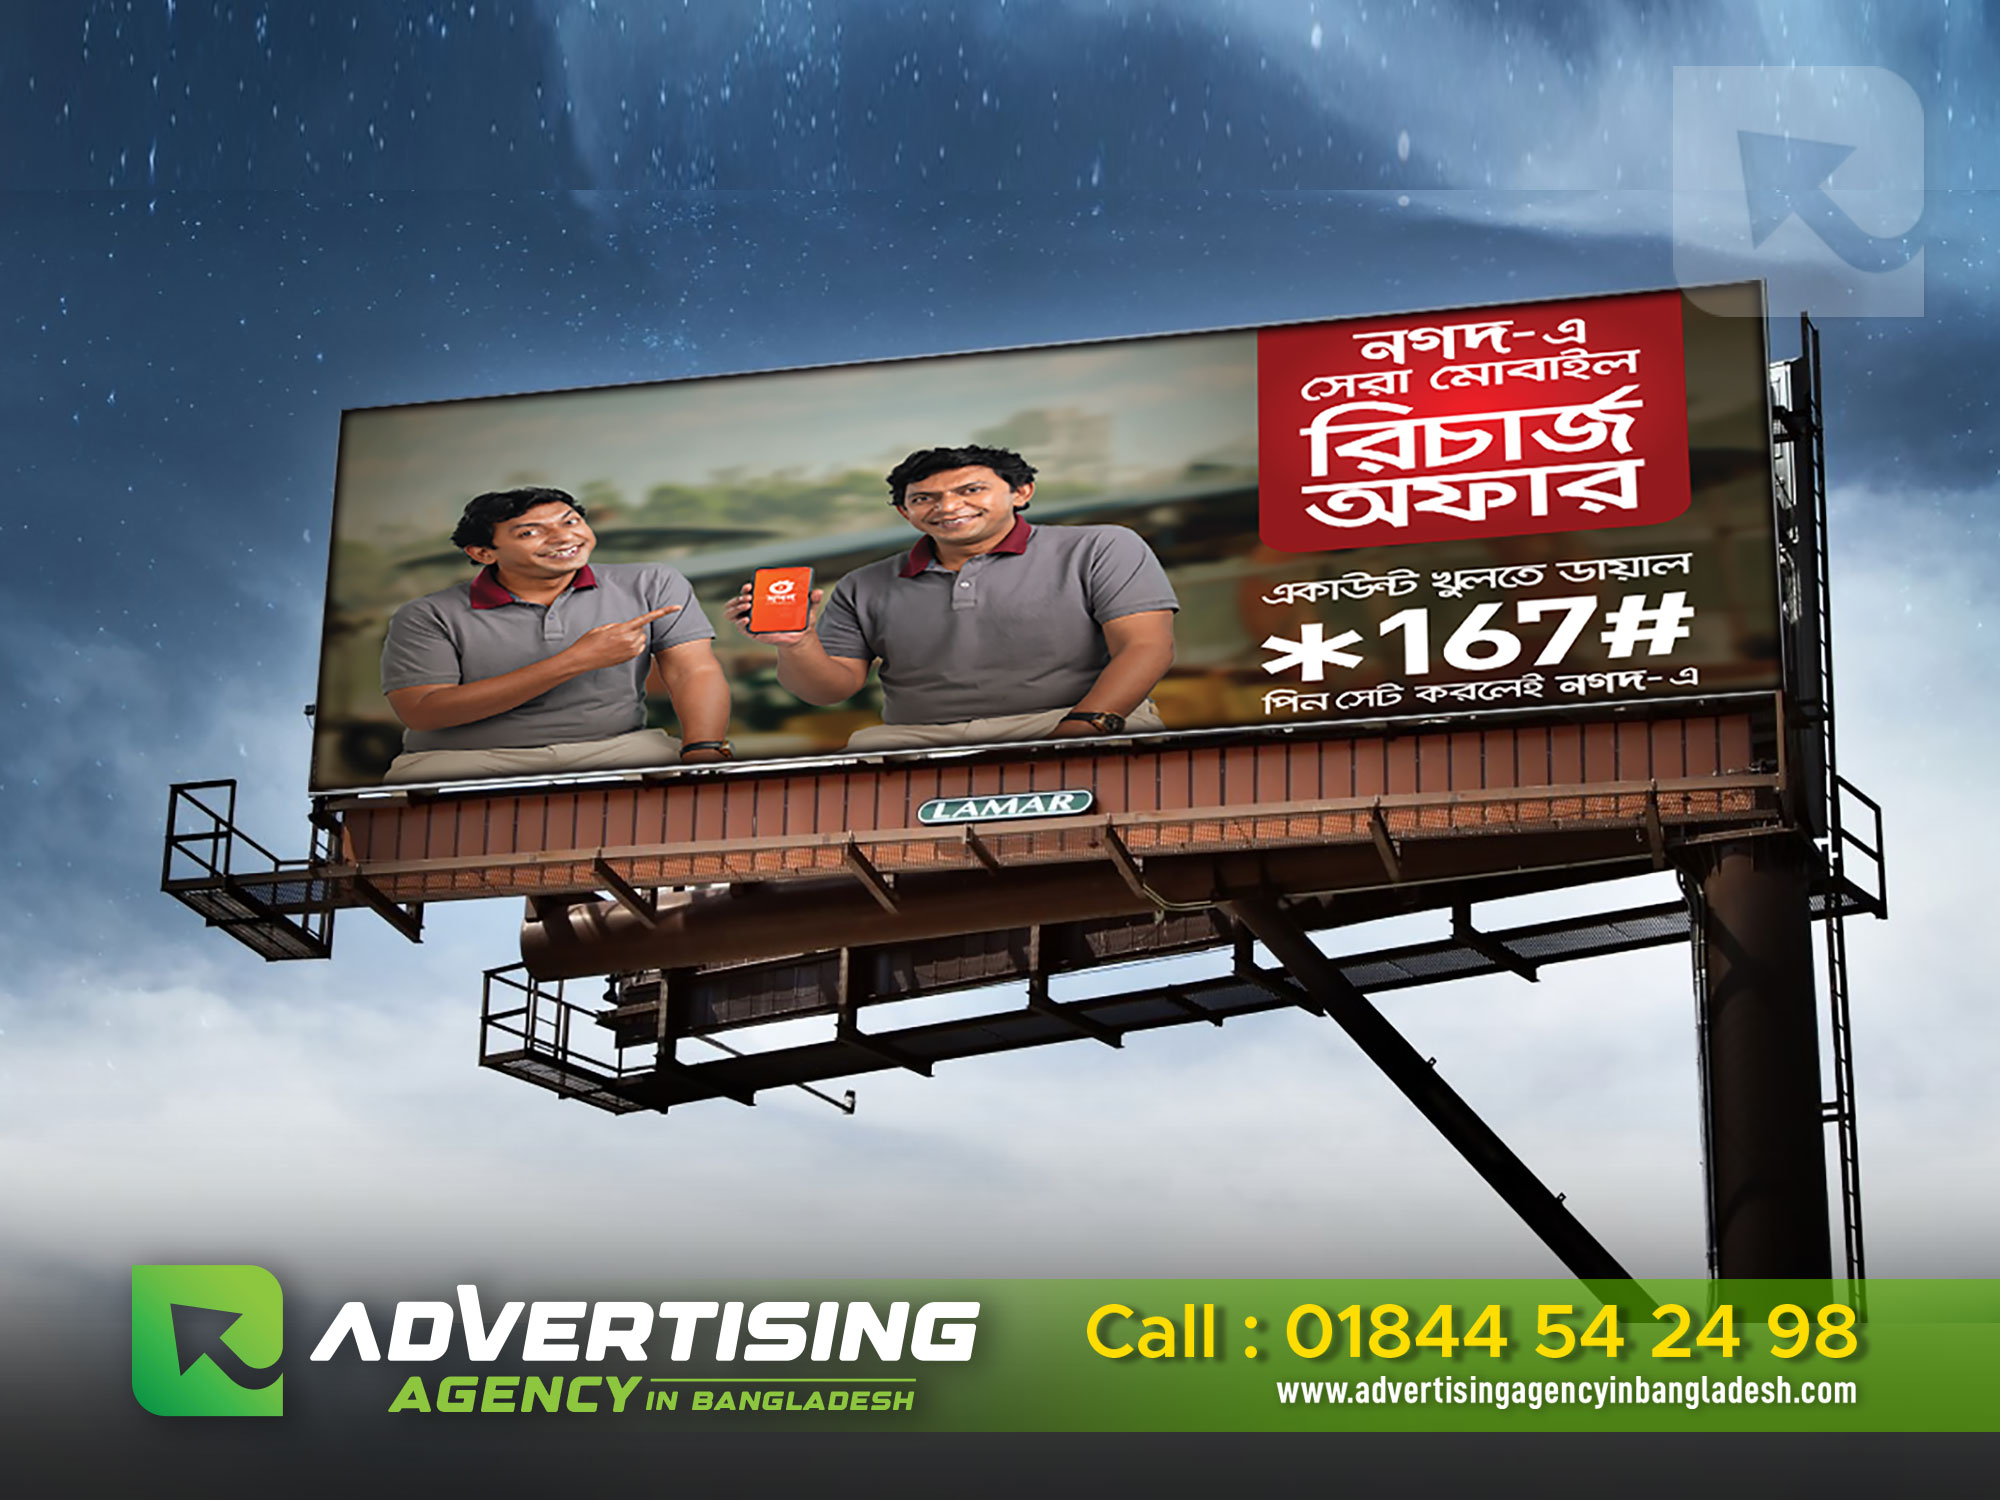 Best 10 Billboard Signboard Advertising agency Company The Advertising Agency in Bangladesh Company is one of Bangladesh's top billboard and hoarding advertising agencies. The greatest hoardings solutions are provided by Our Advertising, making outdoor advertising for businesses less challenging. The business offers the most modern components and an intuitive setting that enables advertising businesses to reach their clients and guarantee the greatest service in a cost-effective manner. The advertising sector and promoters have become more inventive and discovered additional ways to utilize the billboard, which now comes in a variety of shapes and designs, effectively. Thus, after posting your requests on a website, say, a platform for Bangladeshi hoarding advertising companies. A notable rival to this high-quality service in Bangladesh is Next Resolution Films, which employs hoarding advertising agencies. 100 Commercial Billboard Signboard Company Making billboards and renting out advertising space. Price Of Roadside Billboard And Signboard In Bangladesh Price Of Roadside Billboard And Signboard In Bangladesh. Bangladeshi billboard advertising agency. All around Bangladesh, there are signs and advertising branding. Our Service Digital Print Pana, PVC, All Kinds of Billboard. The Advertising Agency in Bangladesh Company is one of Bangladesh's top billboard and hoarding advertising agencies. The greatest solutions for hoardings are provided by Our Advertising. Bridge Technology, Digital Billboard, LED Advertising Display, and LED Outdoor Sign Board Price in Bangladesh. LED Outdoor Billboard in Bangladesh. Bangladesh's top digital billboard agency. Best Outdoor Advertising Agencies in Bangladesh's capital, Dhaka Best Led advertising billboard in Bangladesh Top maker of Billboard Advertising in Dhaka, Bangladesh is Advertising Agency in Bangladesh Company. You can obtain a pricing or quotation from an advertising agency in Bangladesh for any type of billboard advertising. In Dhaka, Bangladesh, we are a company that exports and imports billboard advertising. Our business was founded in 2006. Bangladesh's Mirpur-1 district is home to the company's headquarters. Stay Firmgate Dhaka, Bangladesh, is where we have our showroom and warehouse. The company was founded by Mr. Belal Ahmed. The business completed about 10,000 different types of led signage both inside and outside of Dhaka between 2006 and 2022. Best 100 Advertising Agencies in Bangladesh (2023) All of our clients are grateful for our excellent service and clear communication. Our business is dedicated to providing after-sale support. Any form of service is available at any time from our support team. Call us if you want to learn how much billboard advertising costs in Bangladesh. Waterproof outdoor electronic billboard display screen for digital billboard manufacturers with Digital Billboard Moving Display & Moving Video LED Billboard LED. Price of LED Billboard P4/P6/P8/P10 Outdoor LED Advertising Billboard at GCTL in Bangladesh is between BDT 4,50,000 and BDT 15,50,000.